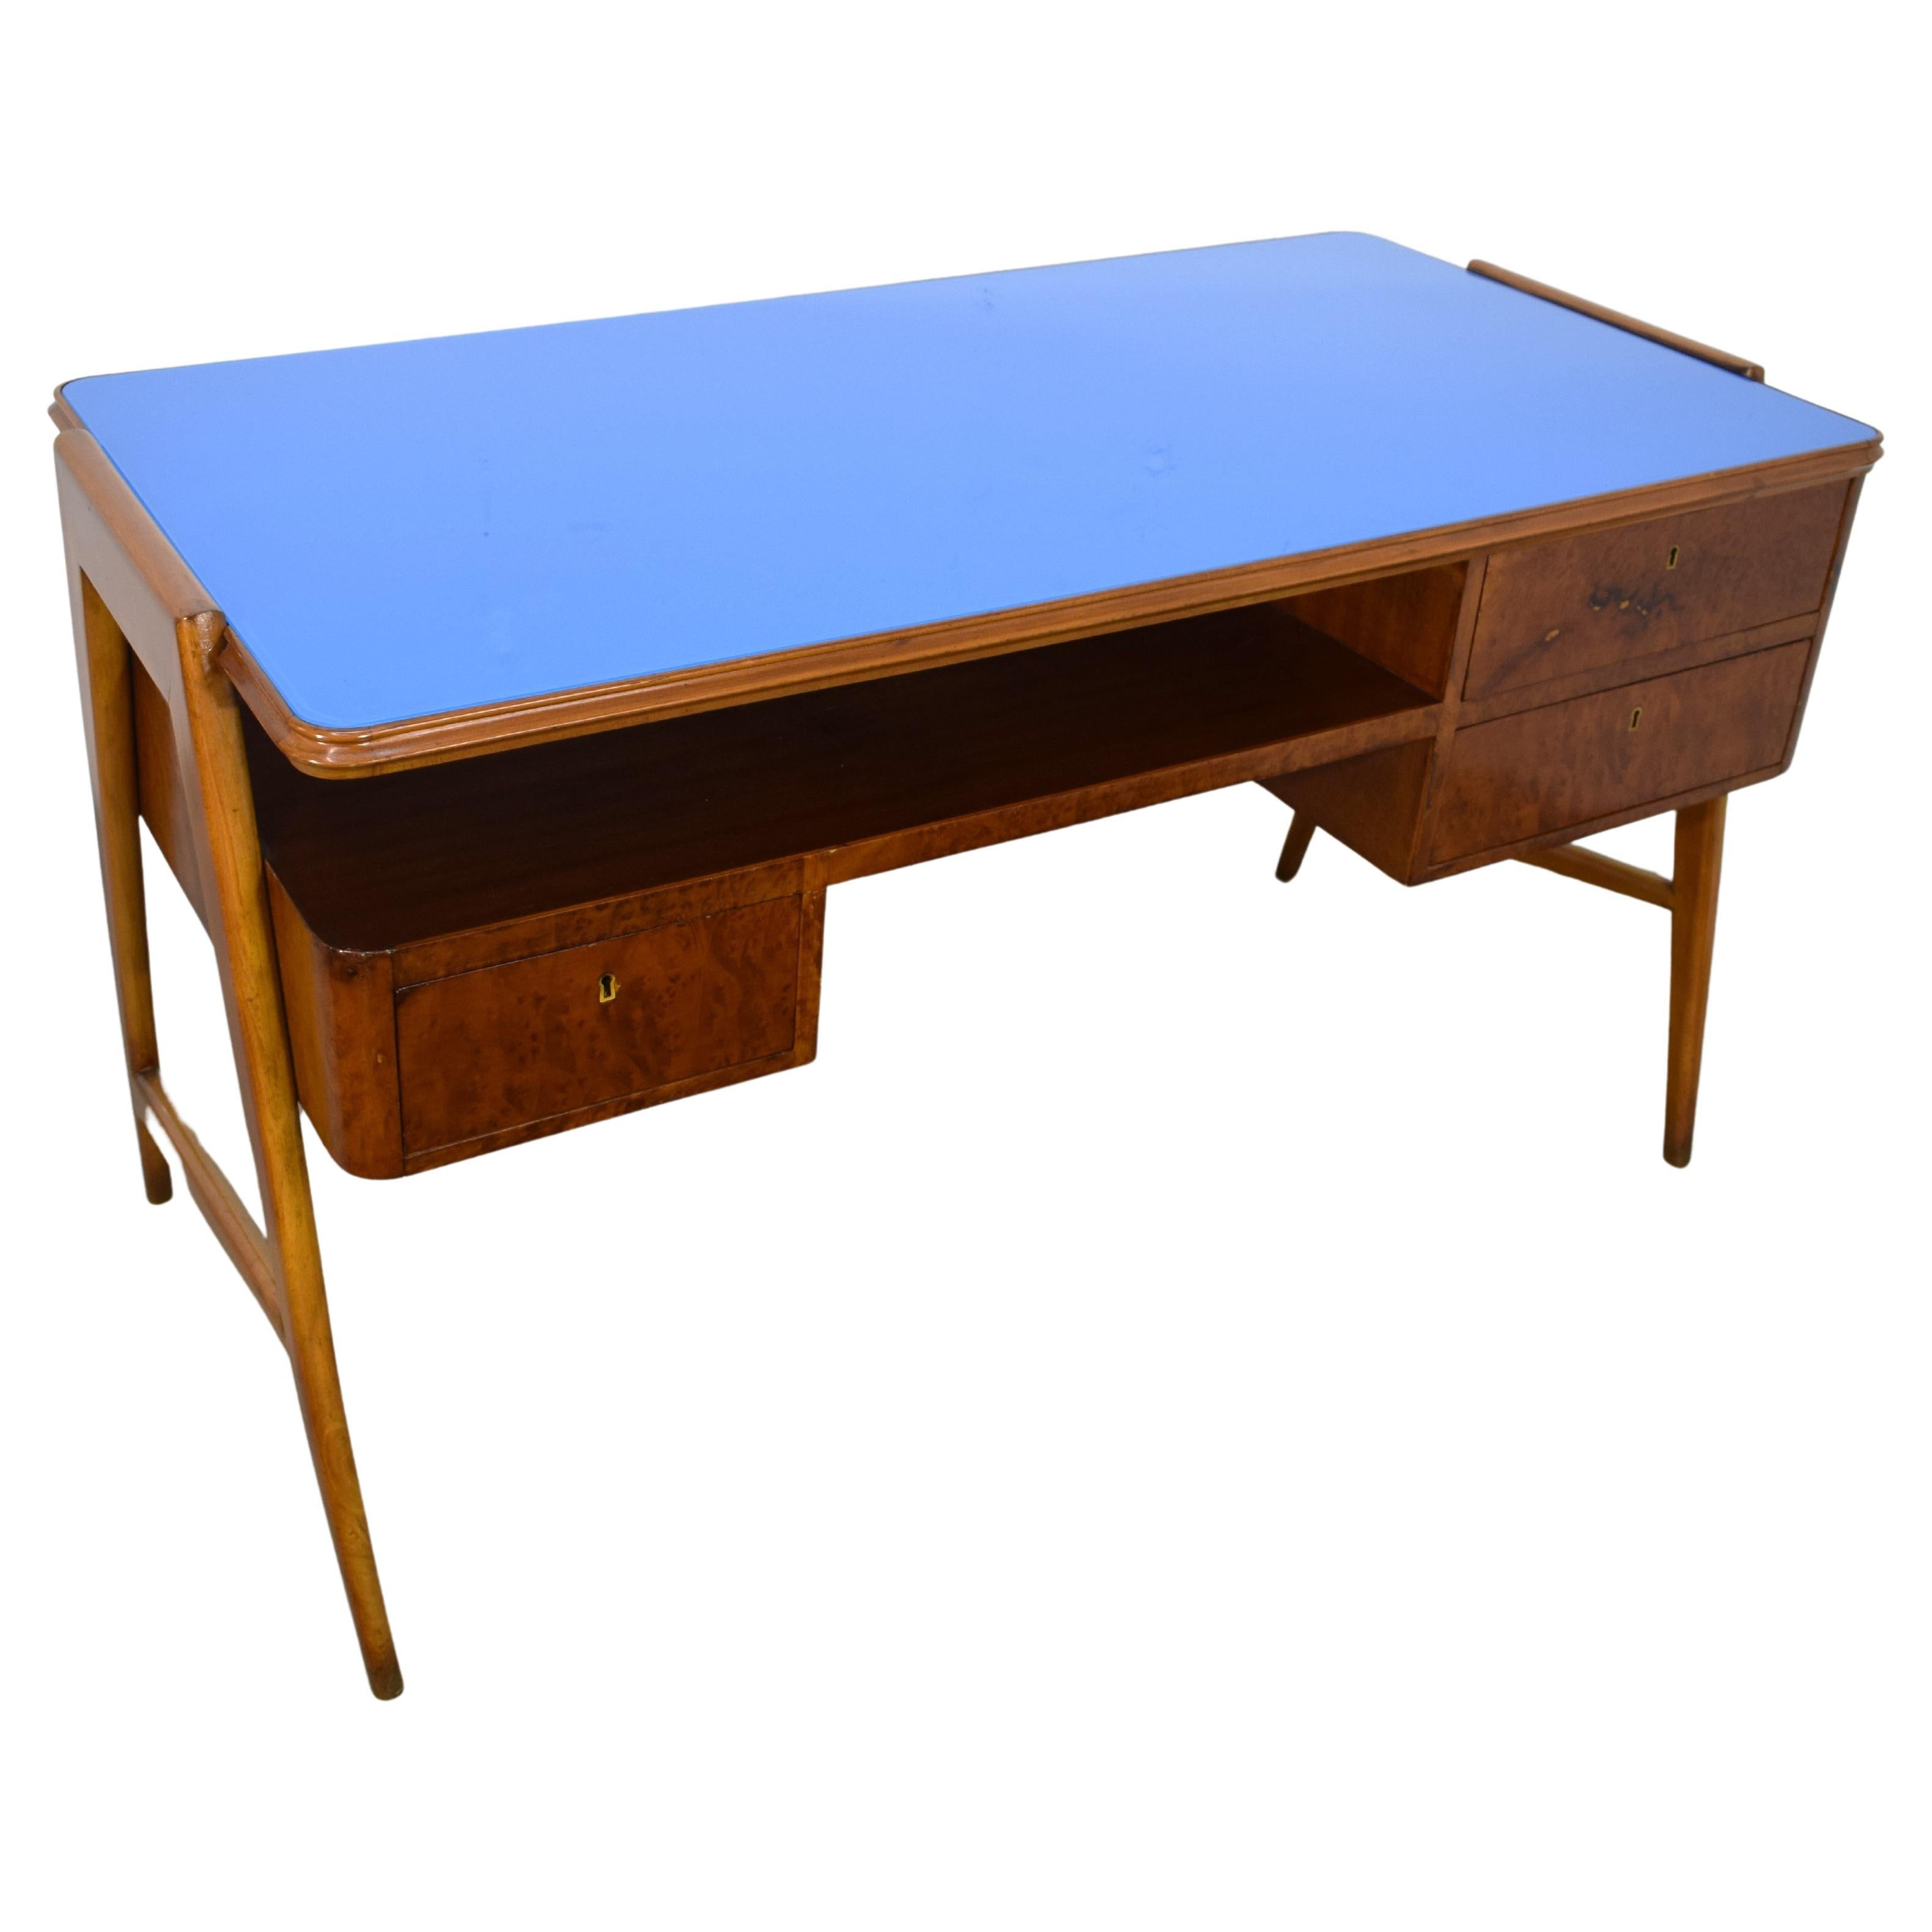 Italian desk, wood and colored glass, 1950s